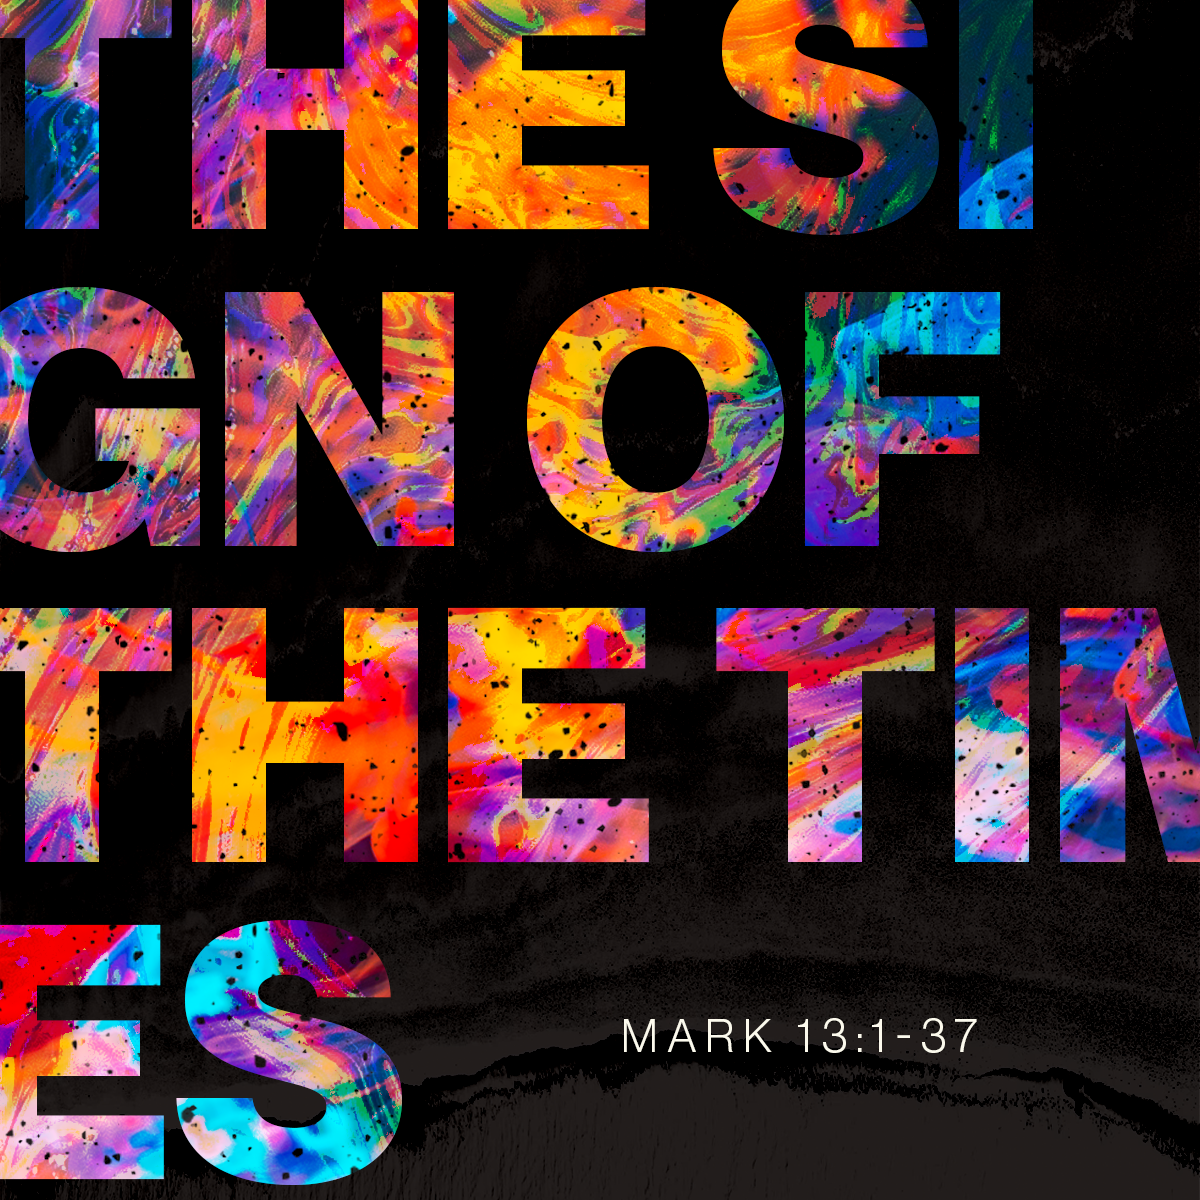 The Sign of the Times (Mark 13:1-37)